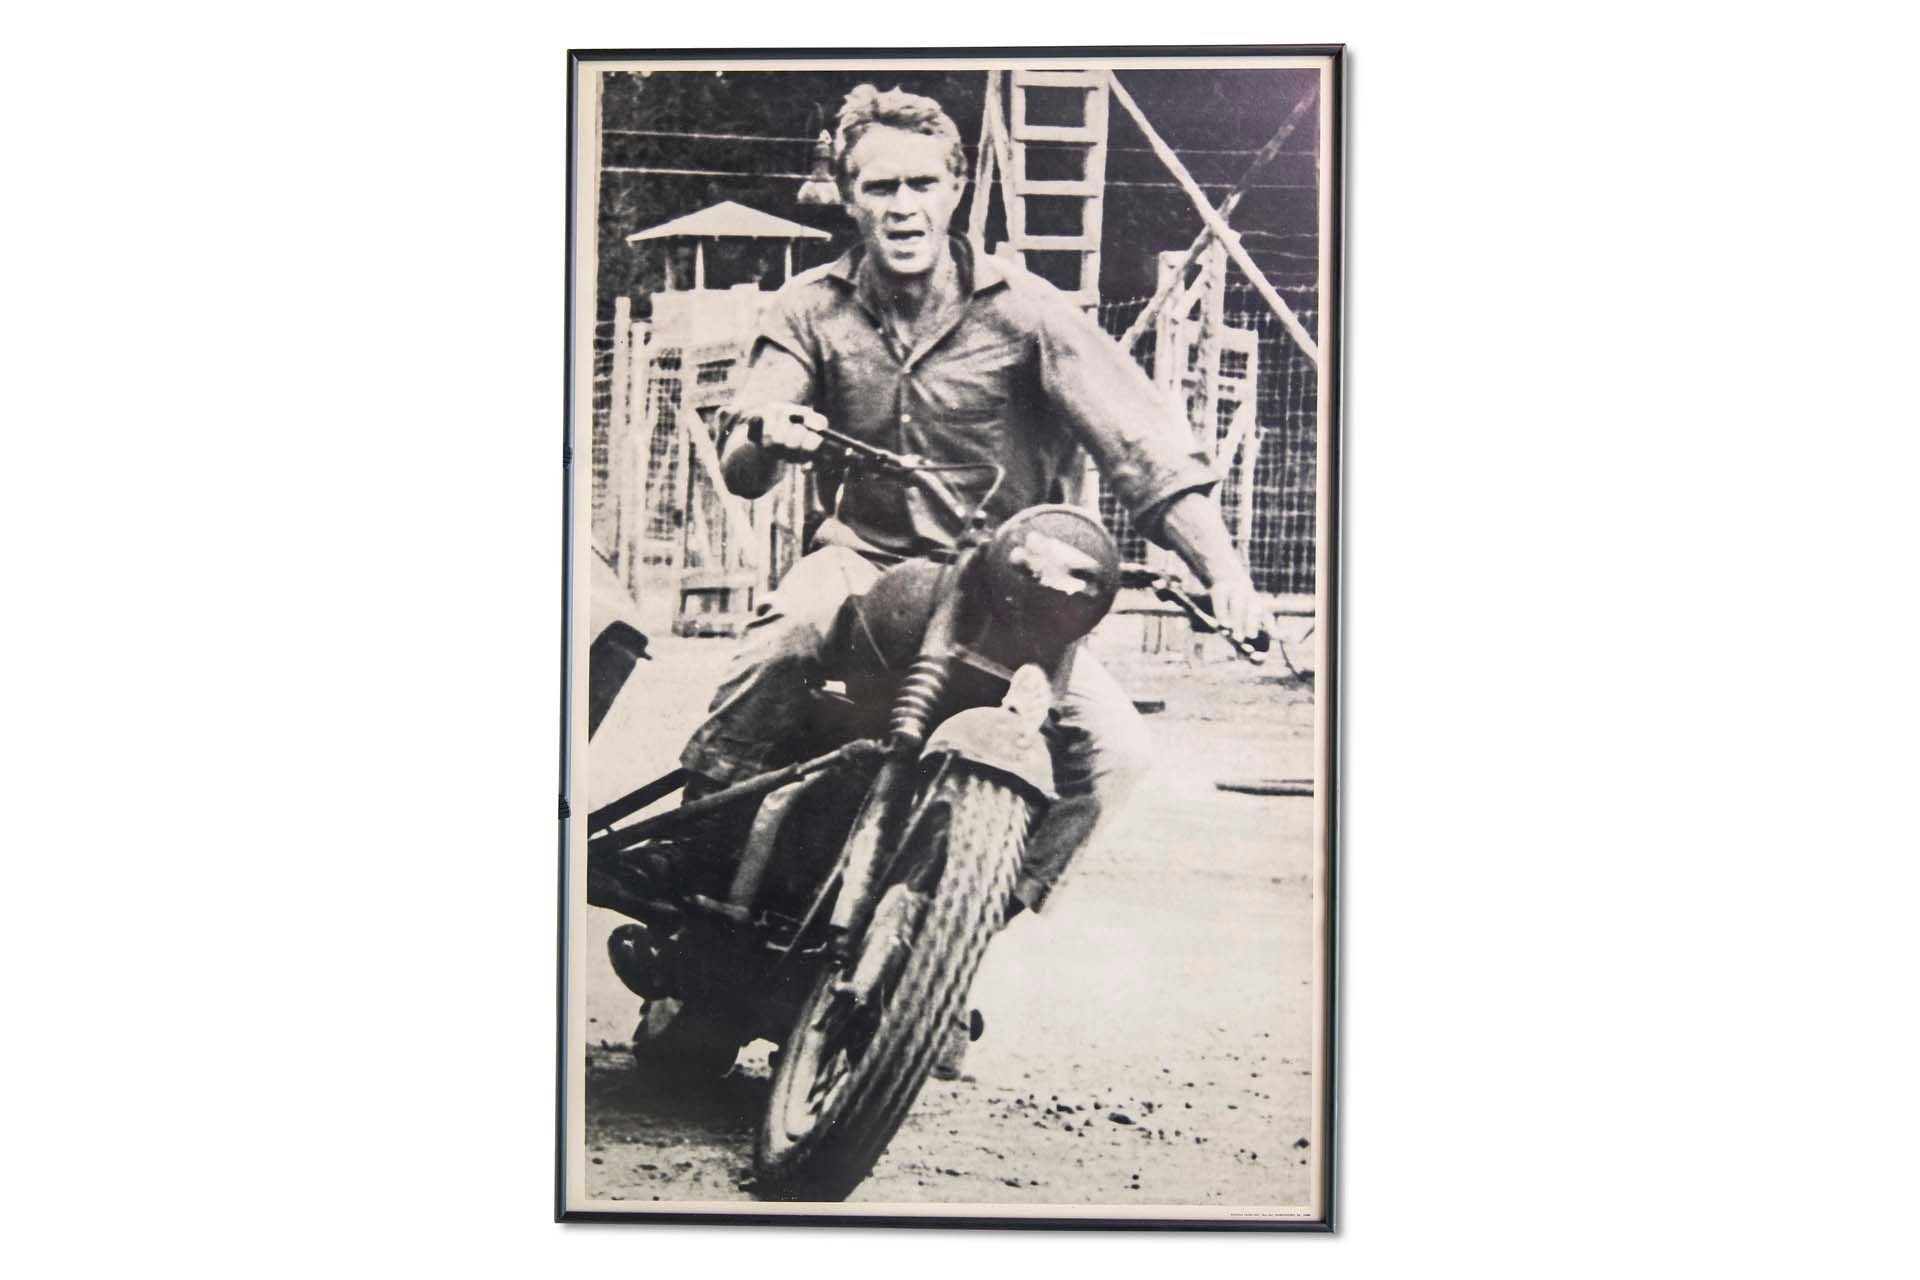 For Sale Framed Original 'Steve McQueen scene likely during the filming of The Great Escape' Poster